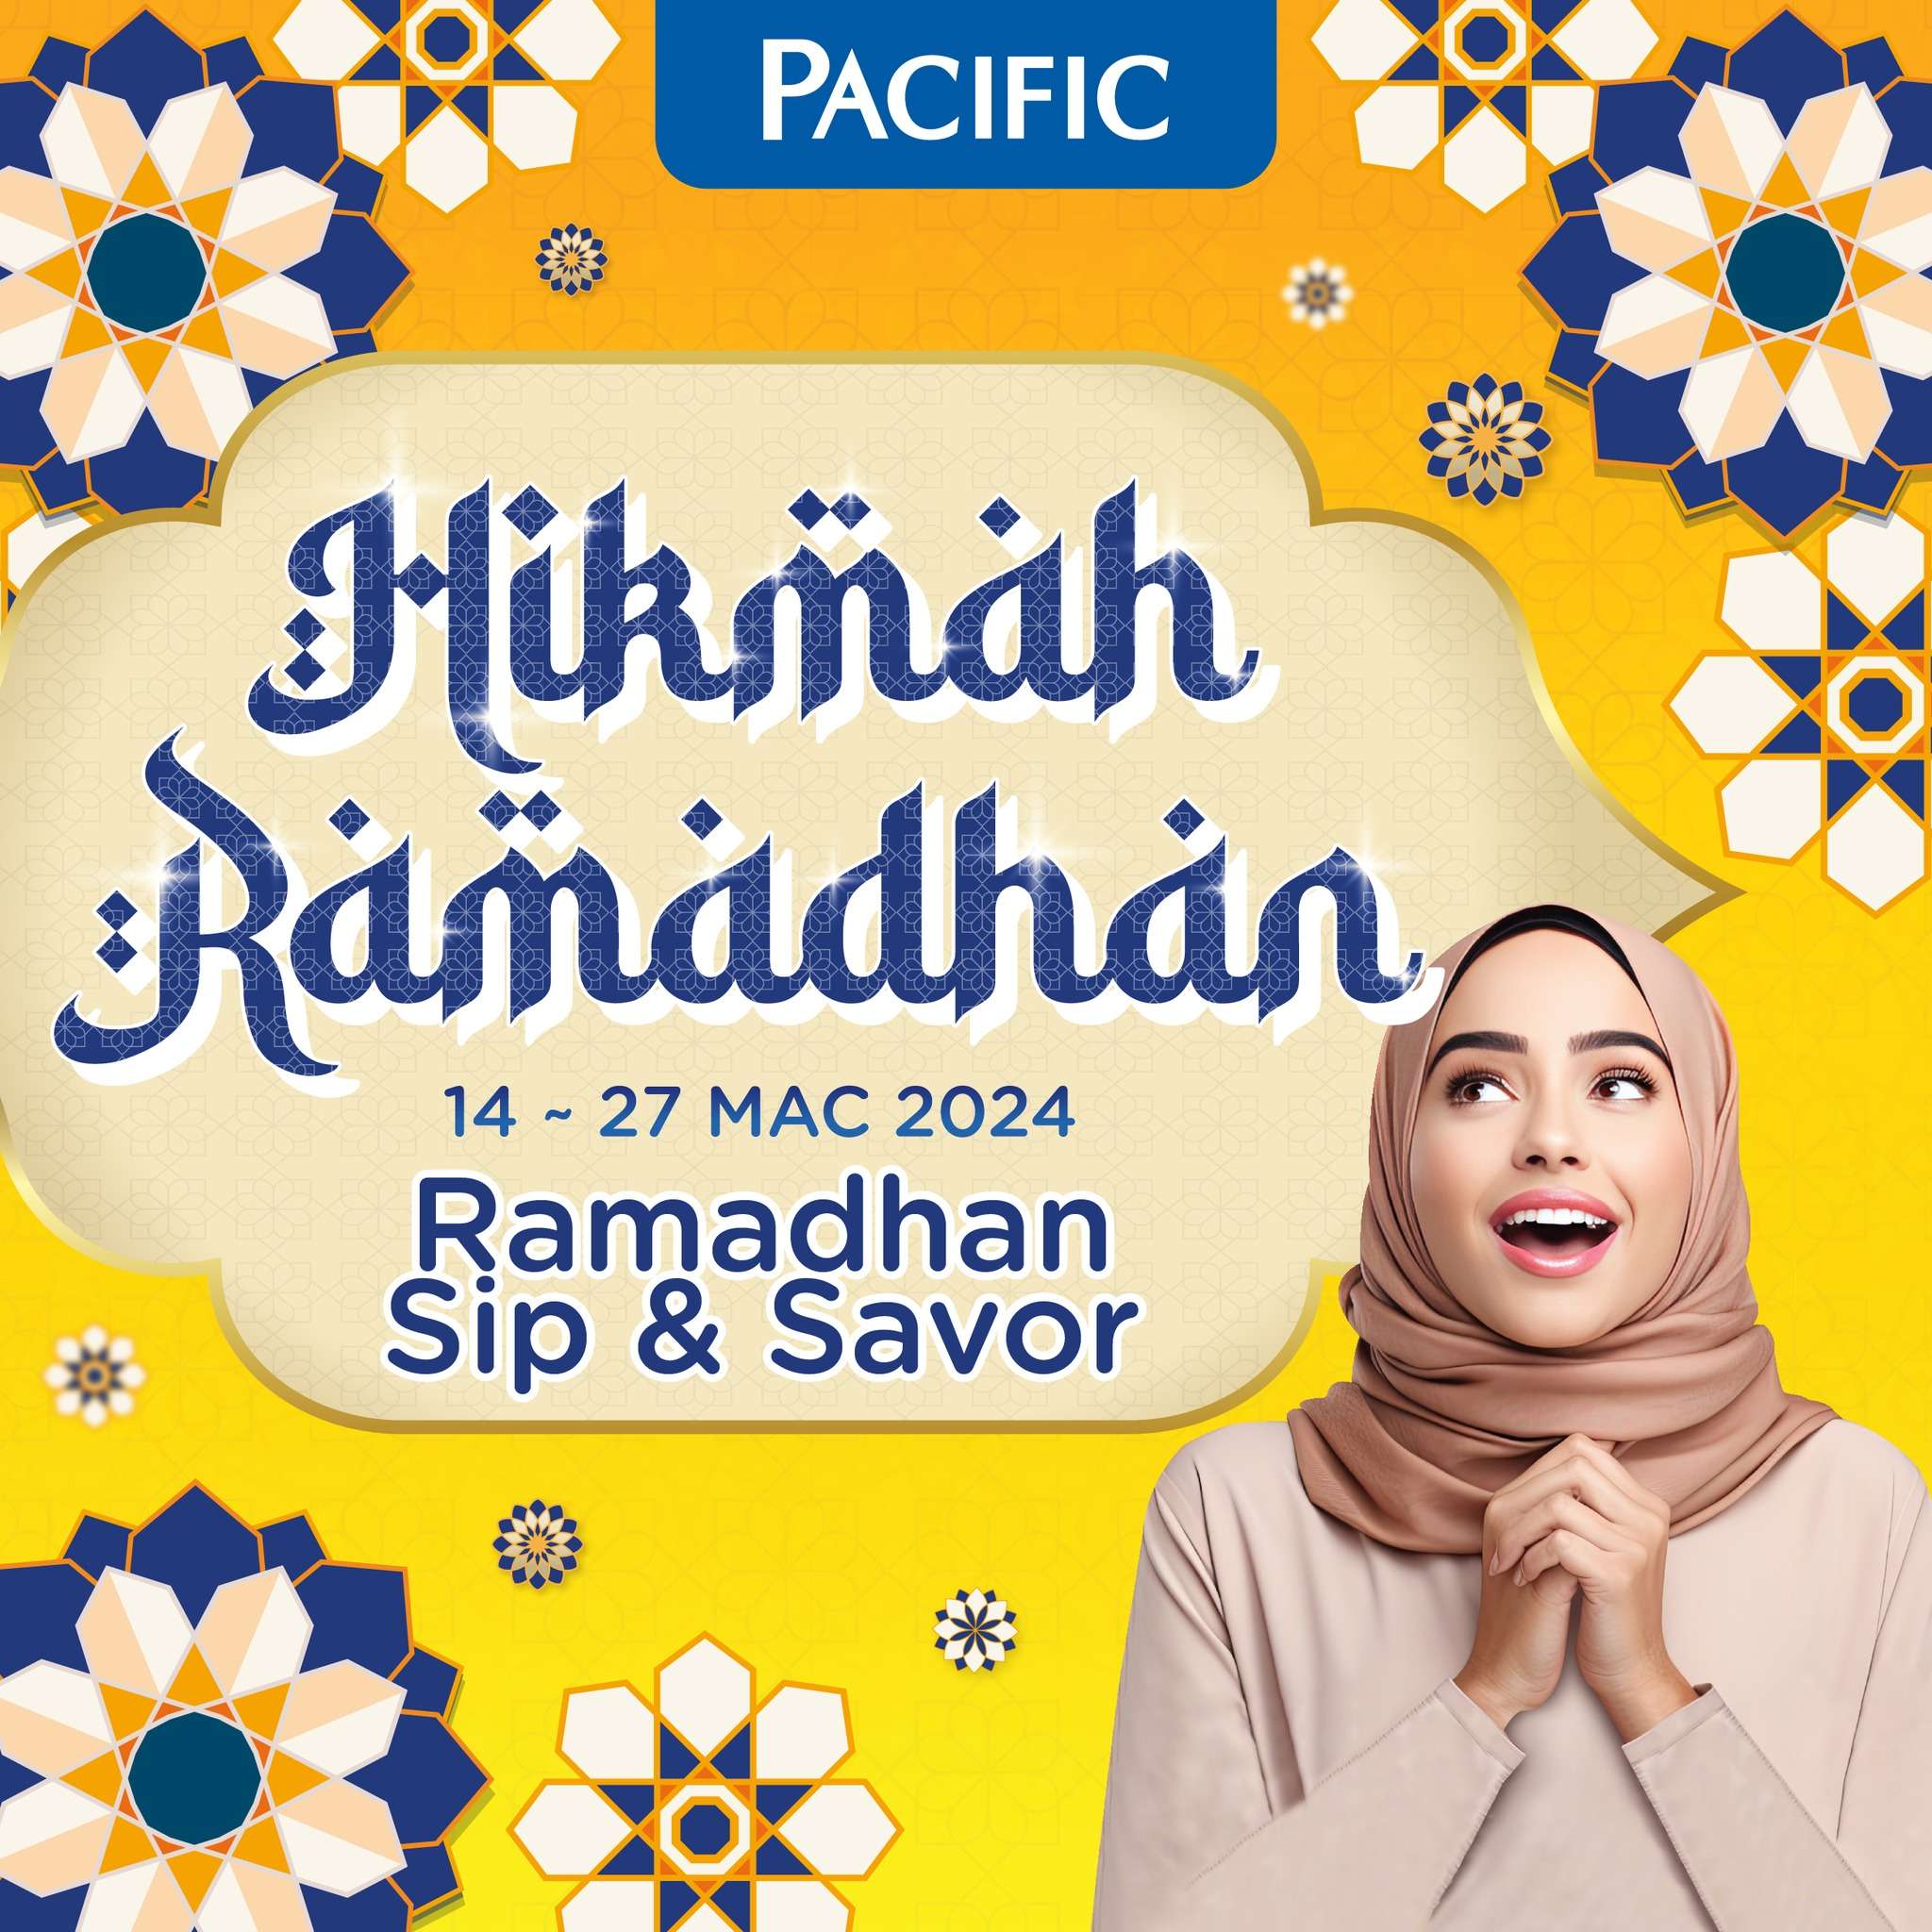 Pacific Malaysia Catalogue (14 March - 27 March 2024)